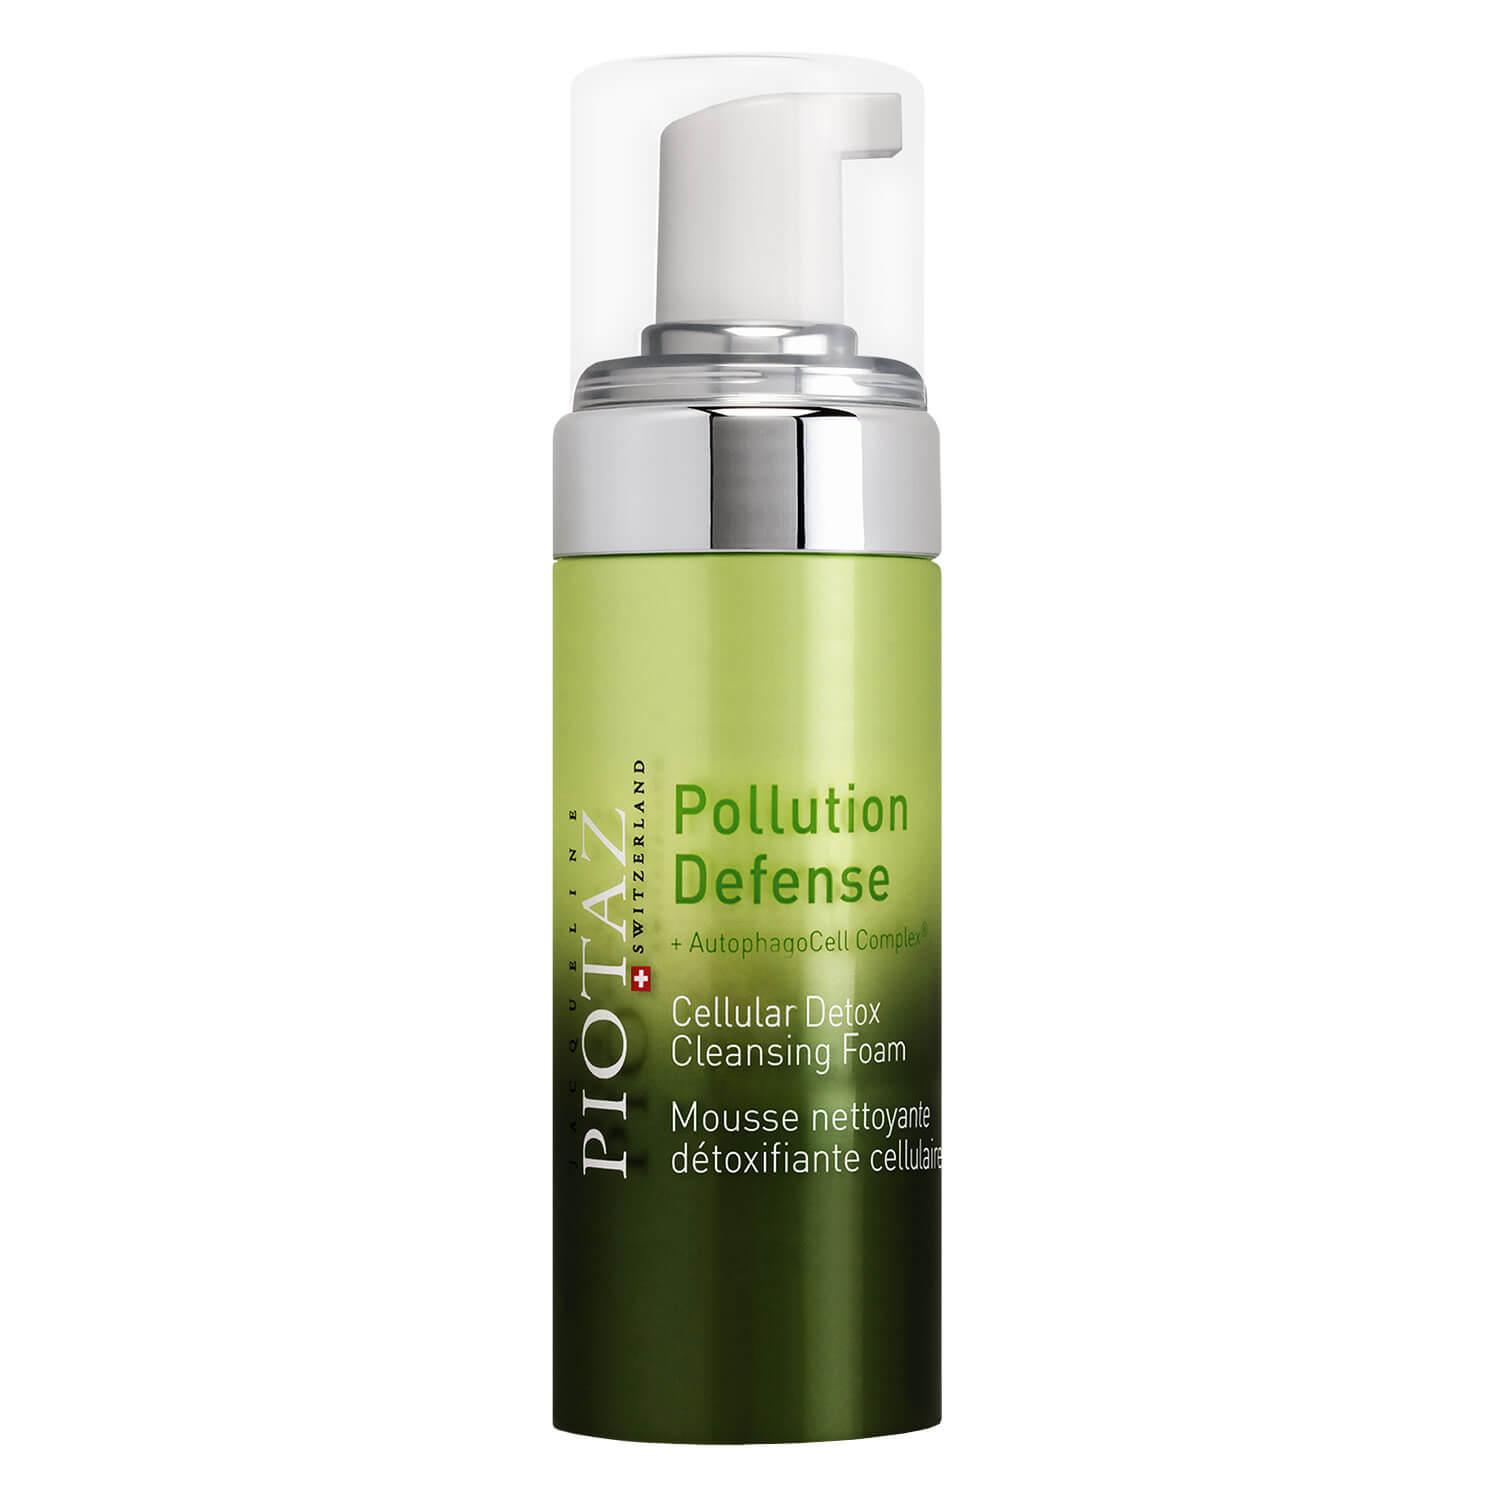 Pollution Defense - The CellDetox Cleansing Foam